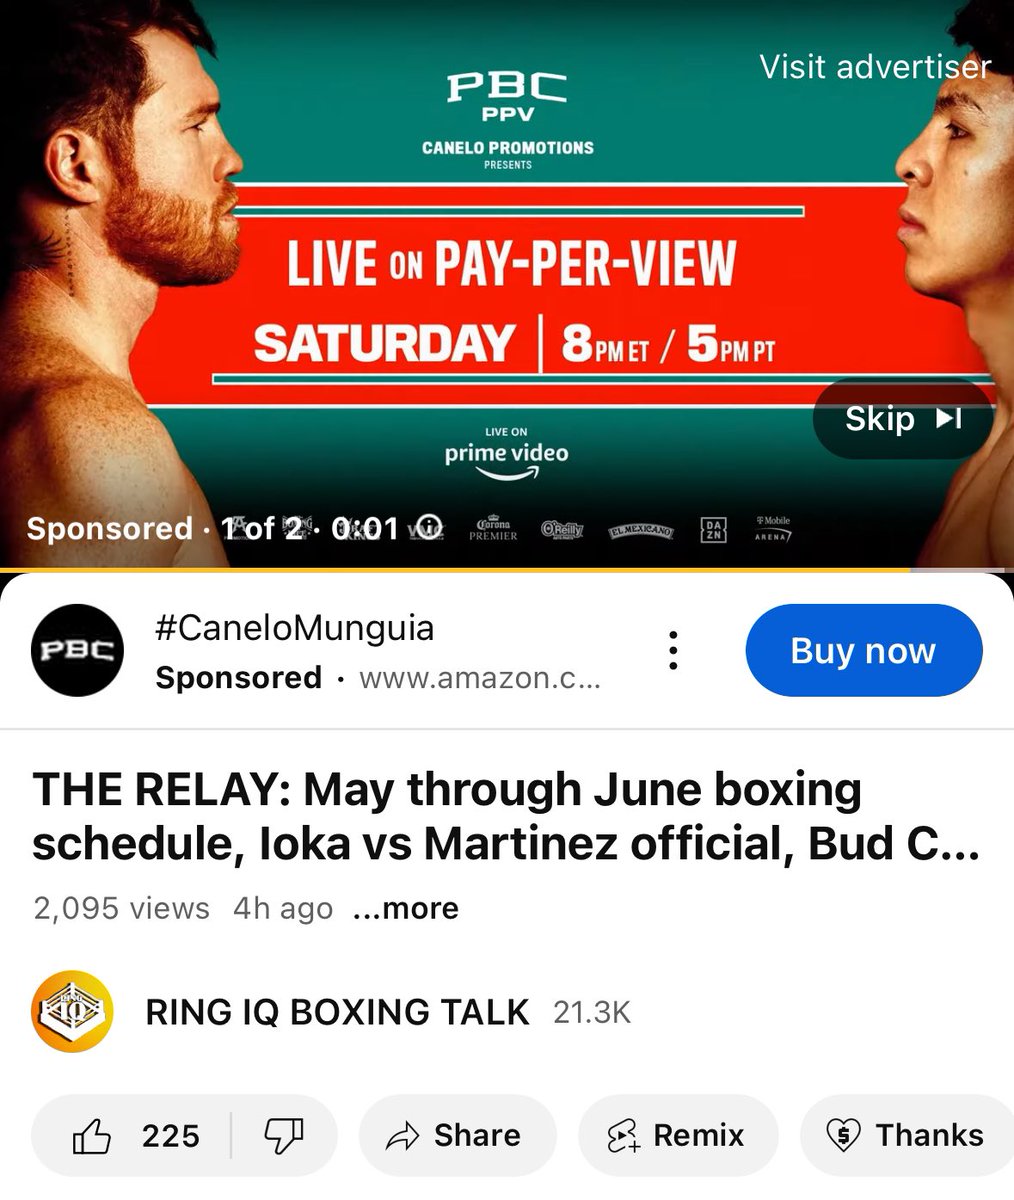 Always nice to see boxing advertised on me wee boxing channel. 🥹